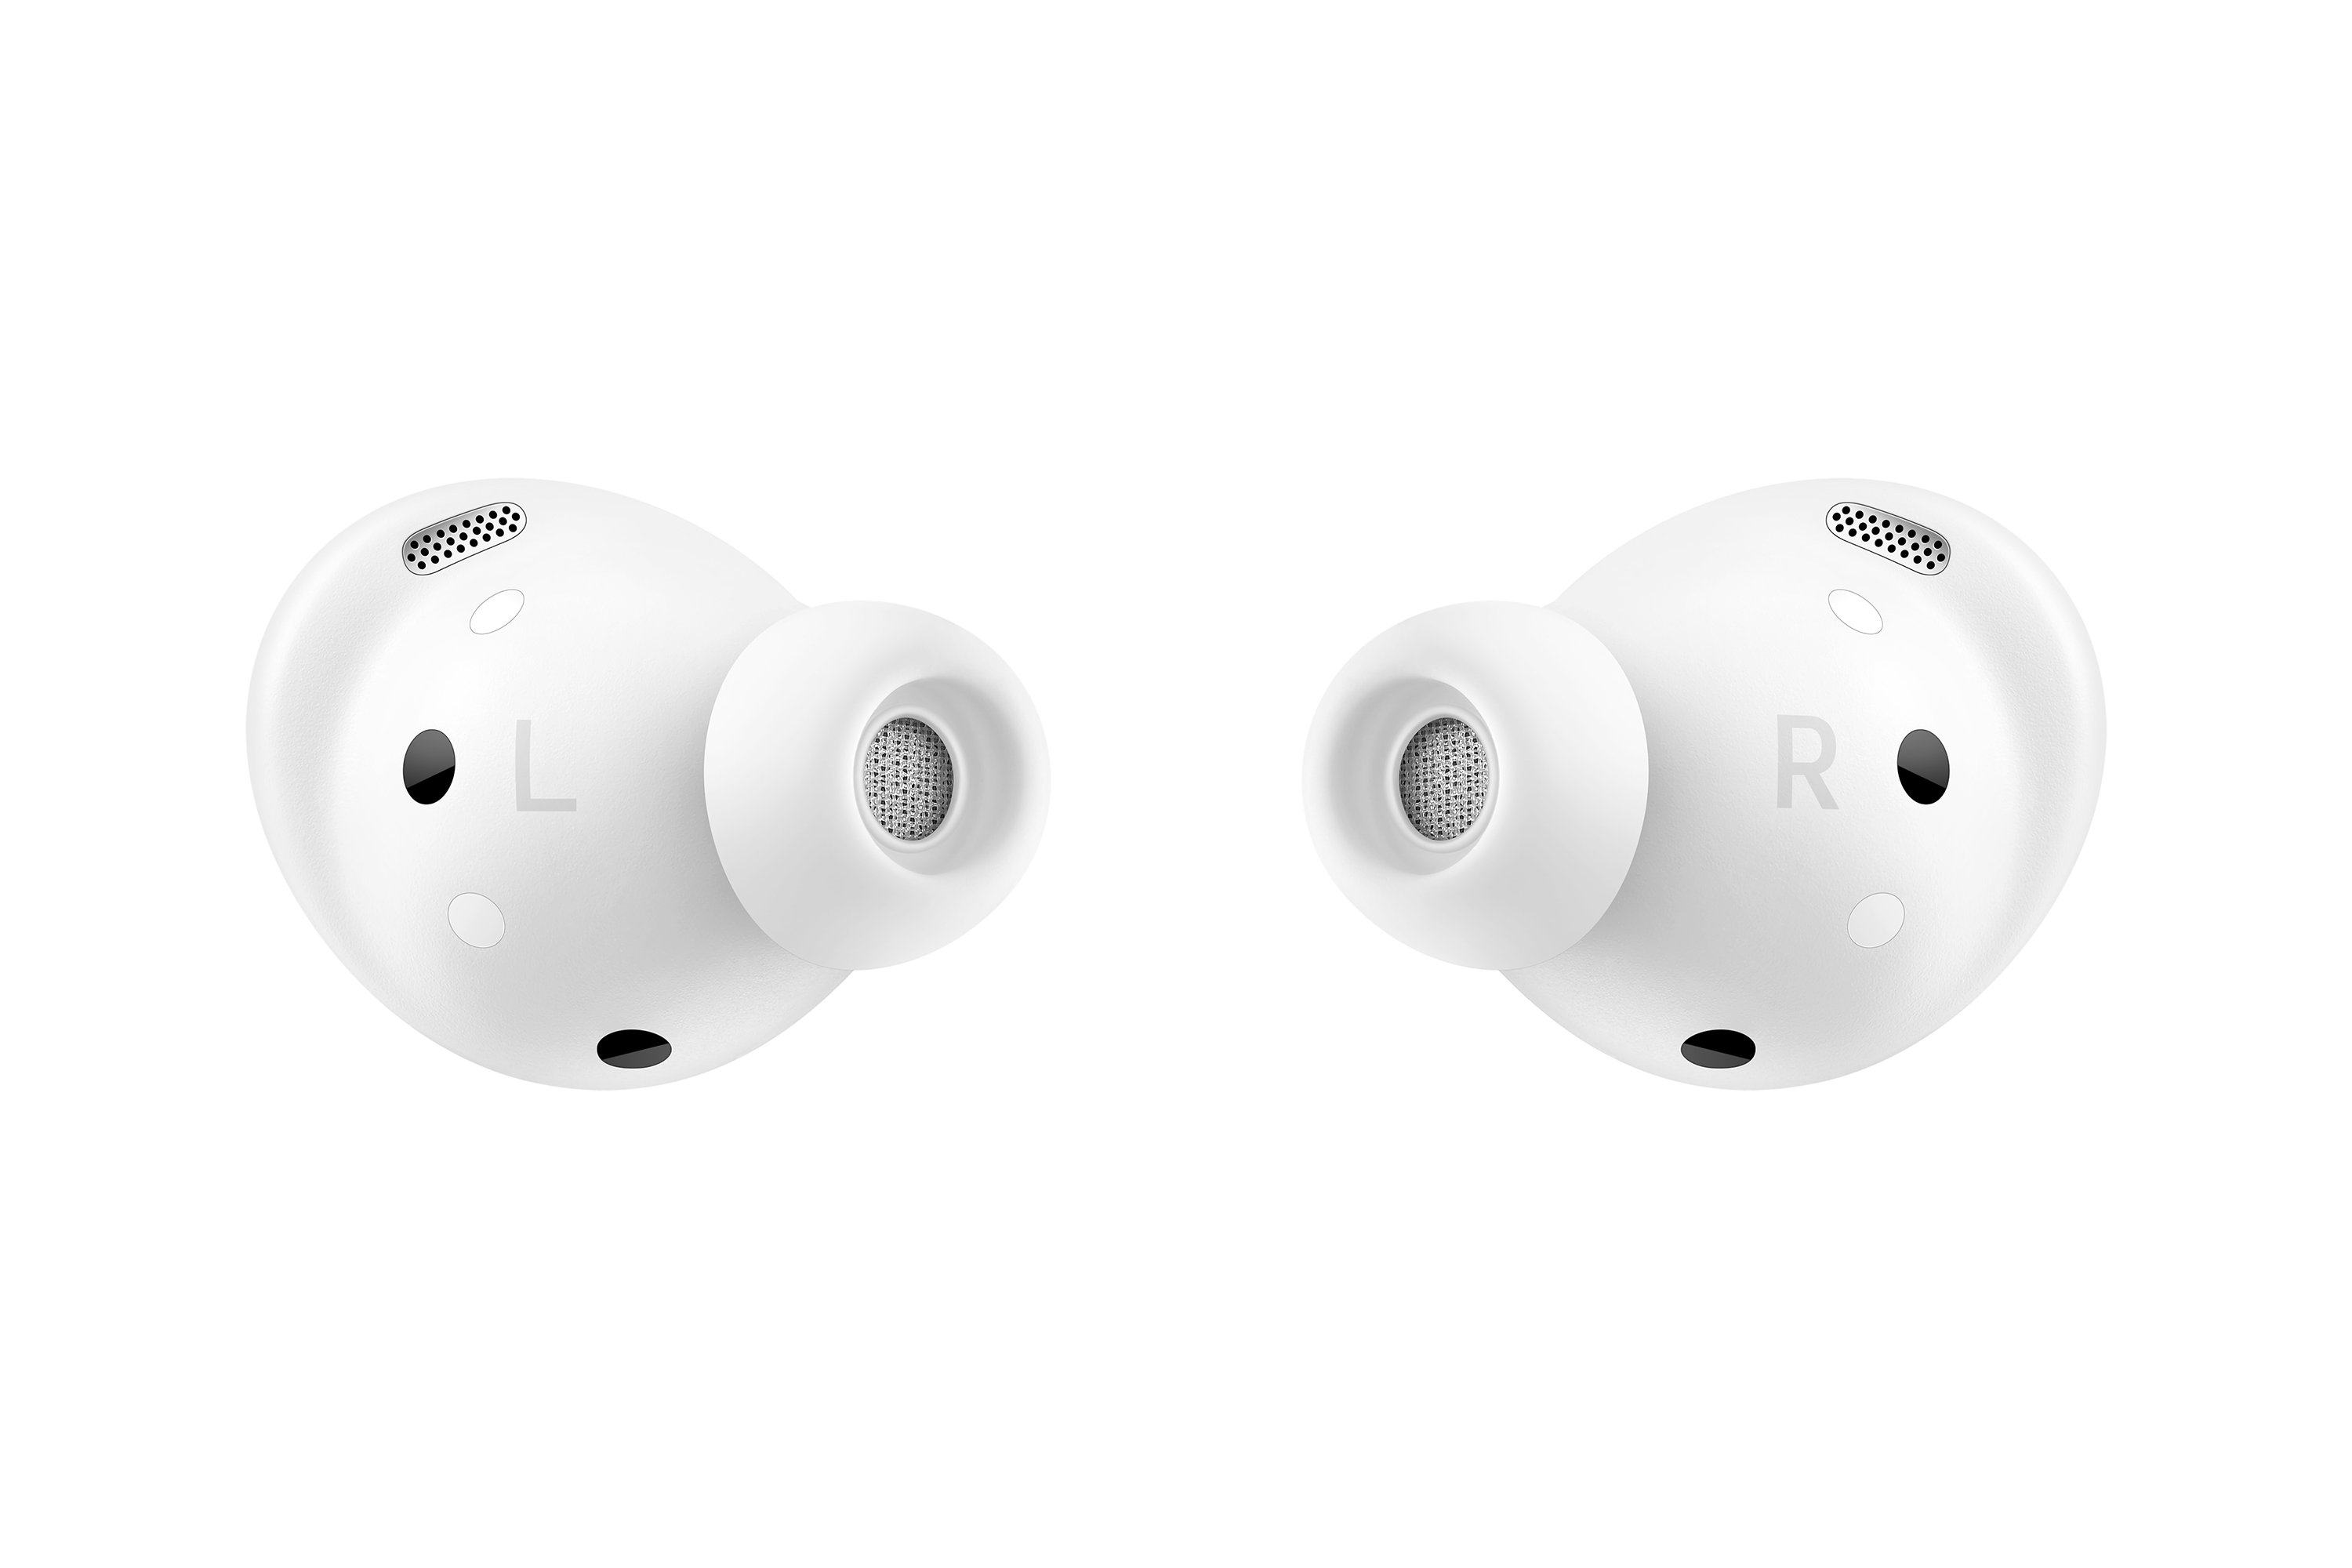 Samsung Galaxy Buds Pro coming in a beautiful new white shade